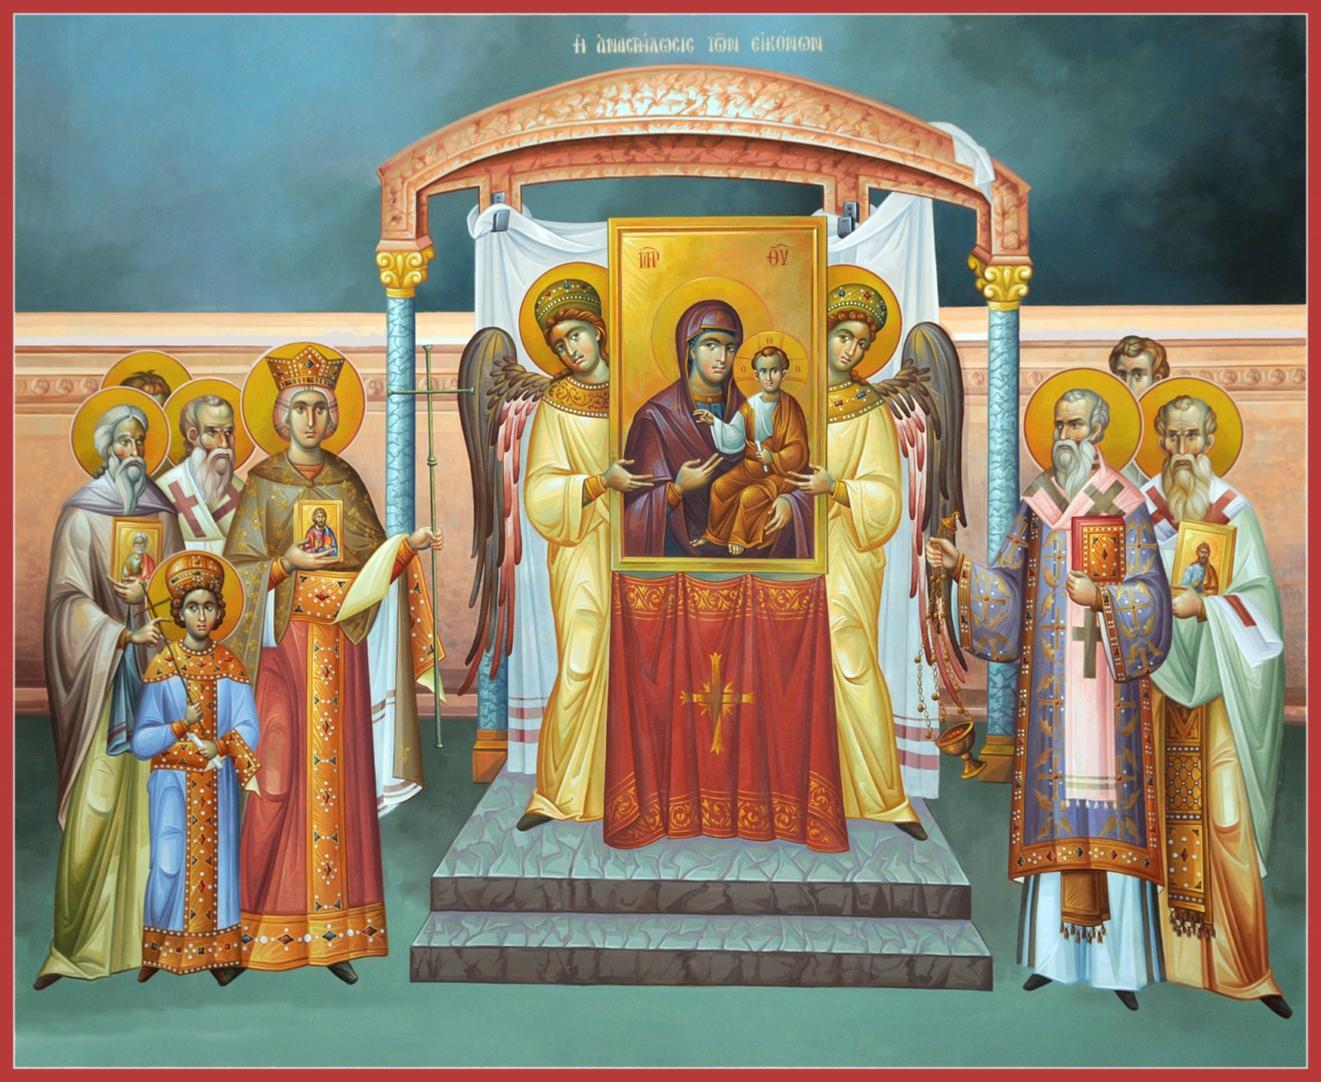 Humility & Love - A Sermon for the Sunday of Orthodoxy (2022)